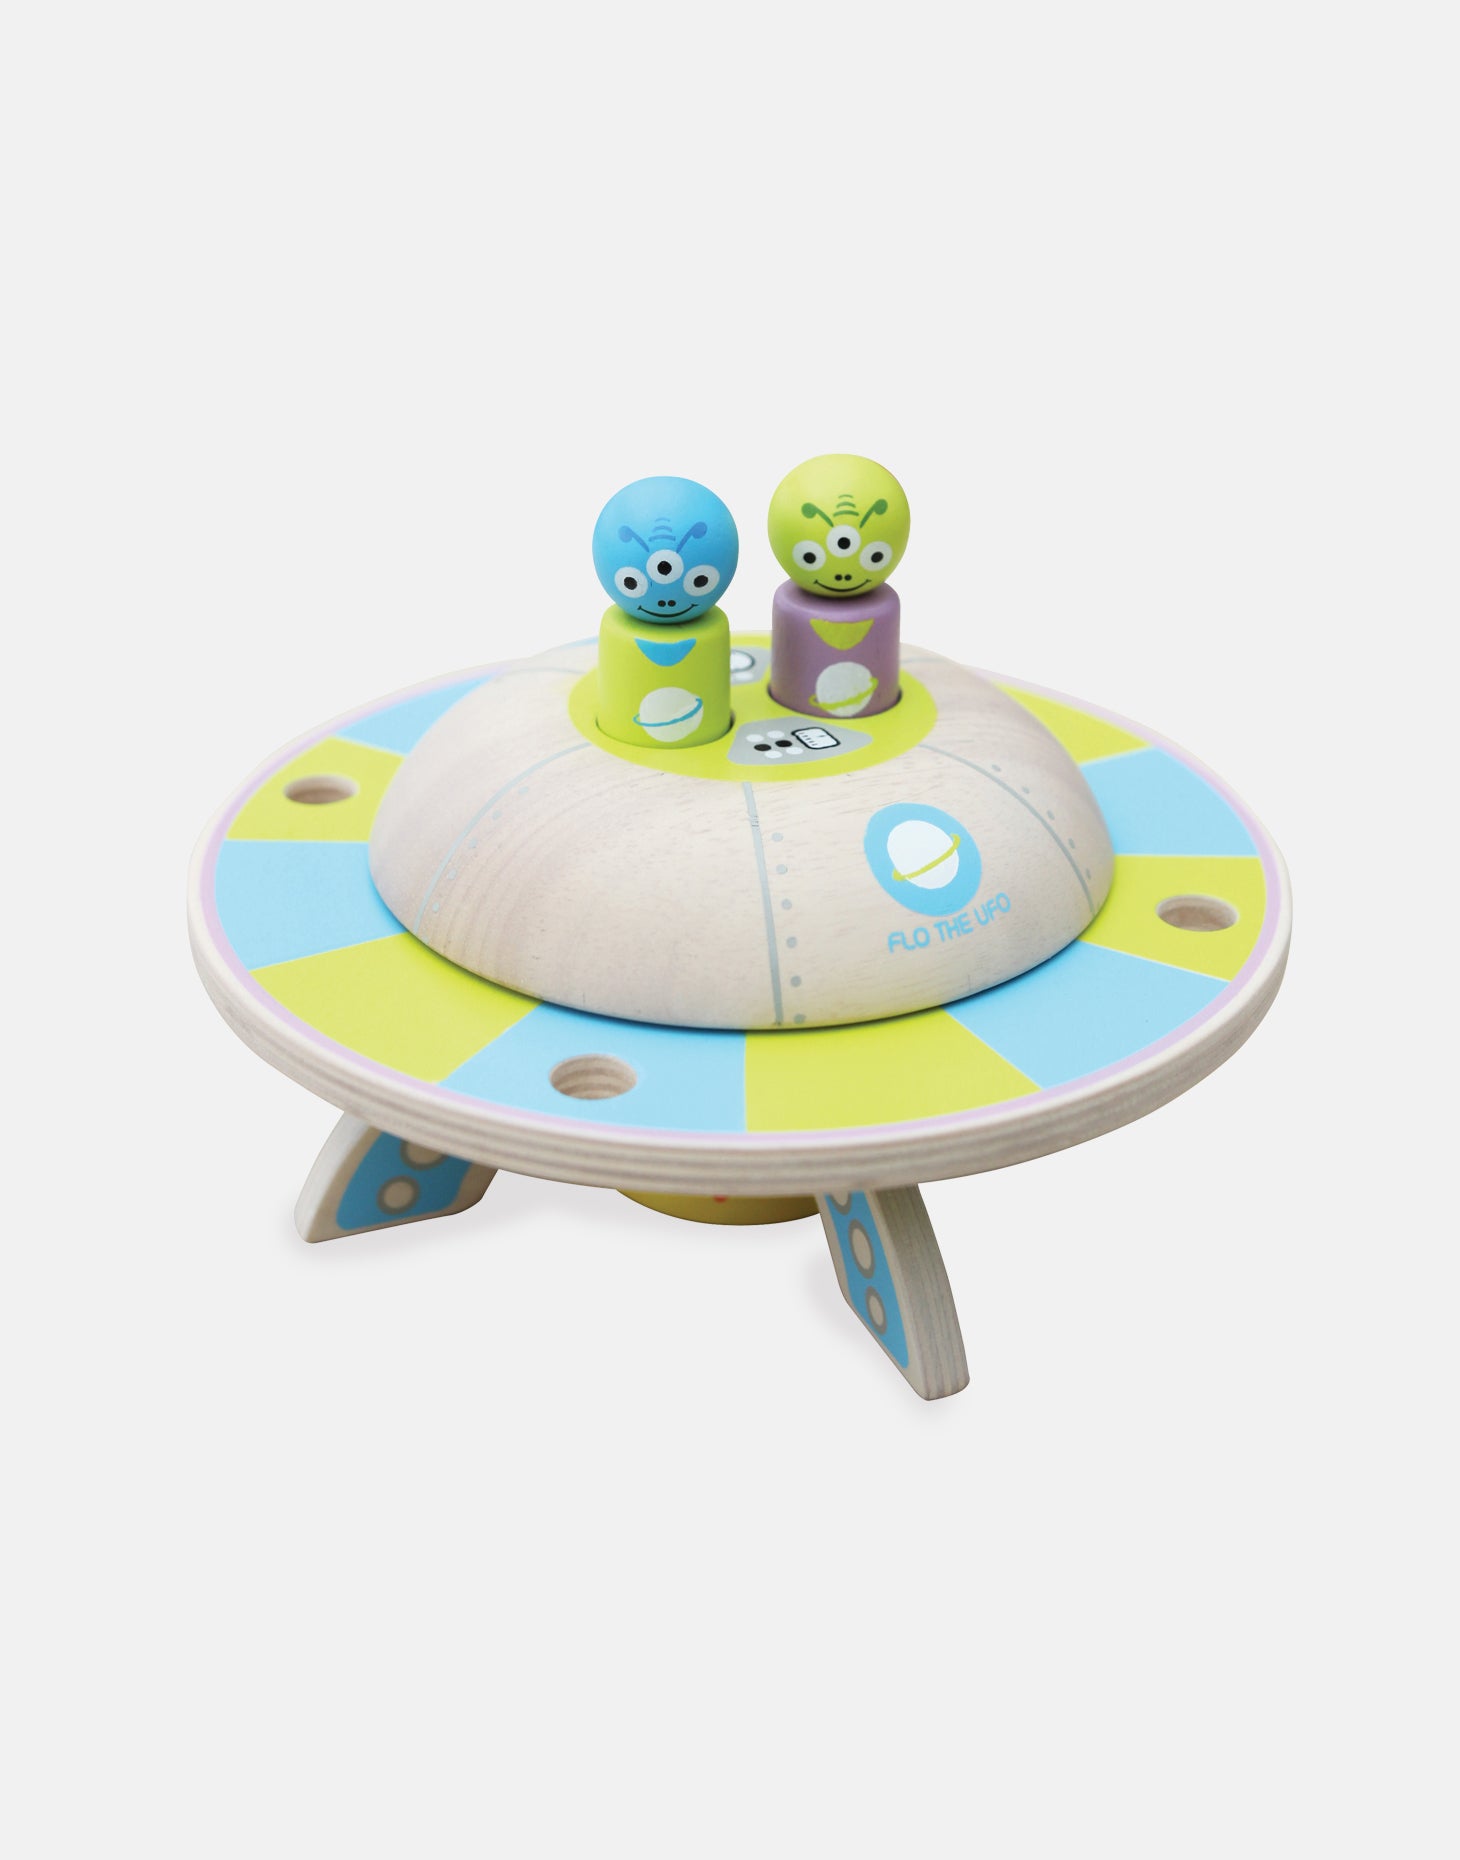 Indigo Jamm quality sustainable wooden toys that are built to last